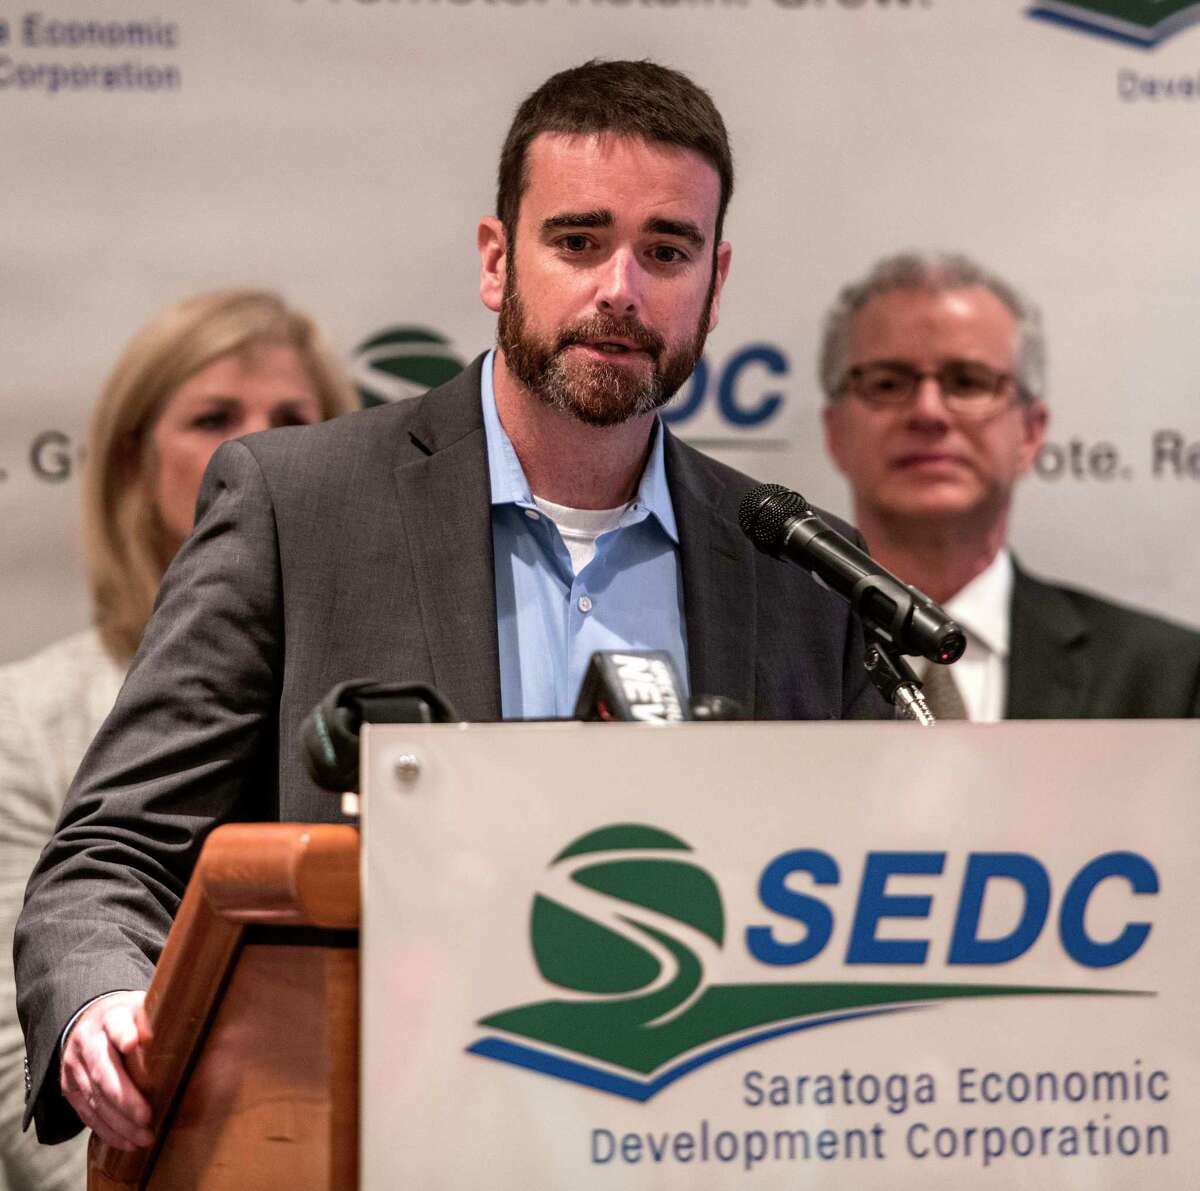 Andrew Kennedy, CEO, Center for Economic Growth speaks at the announcement of the EDI Squared initiative at a press conference held at the Saratoga Springs Holiday Inn Friday June 29, 2018 in Saratoga Springs, N.Y. (Skip Dickstein/Times Union)